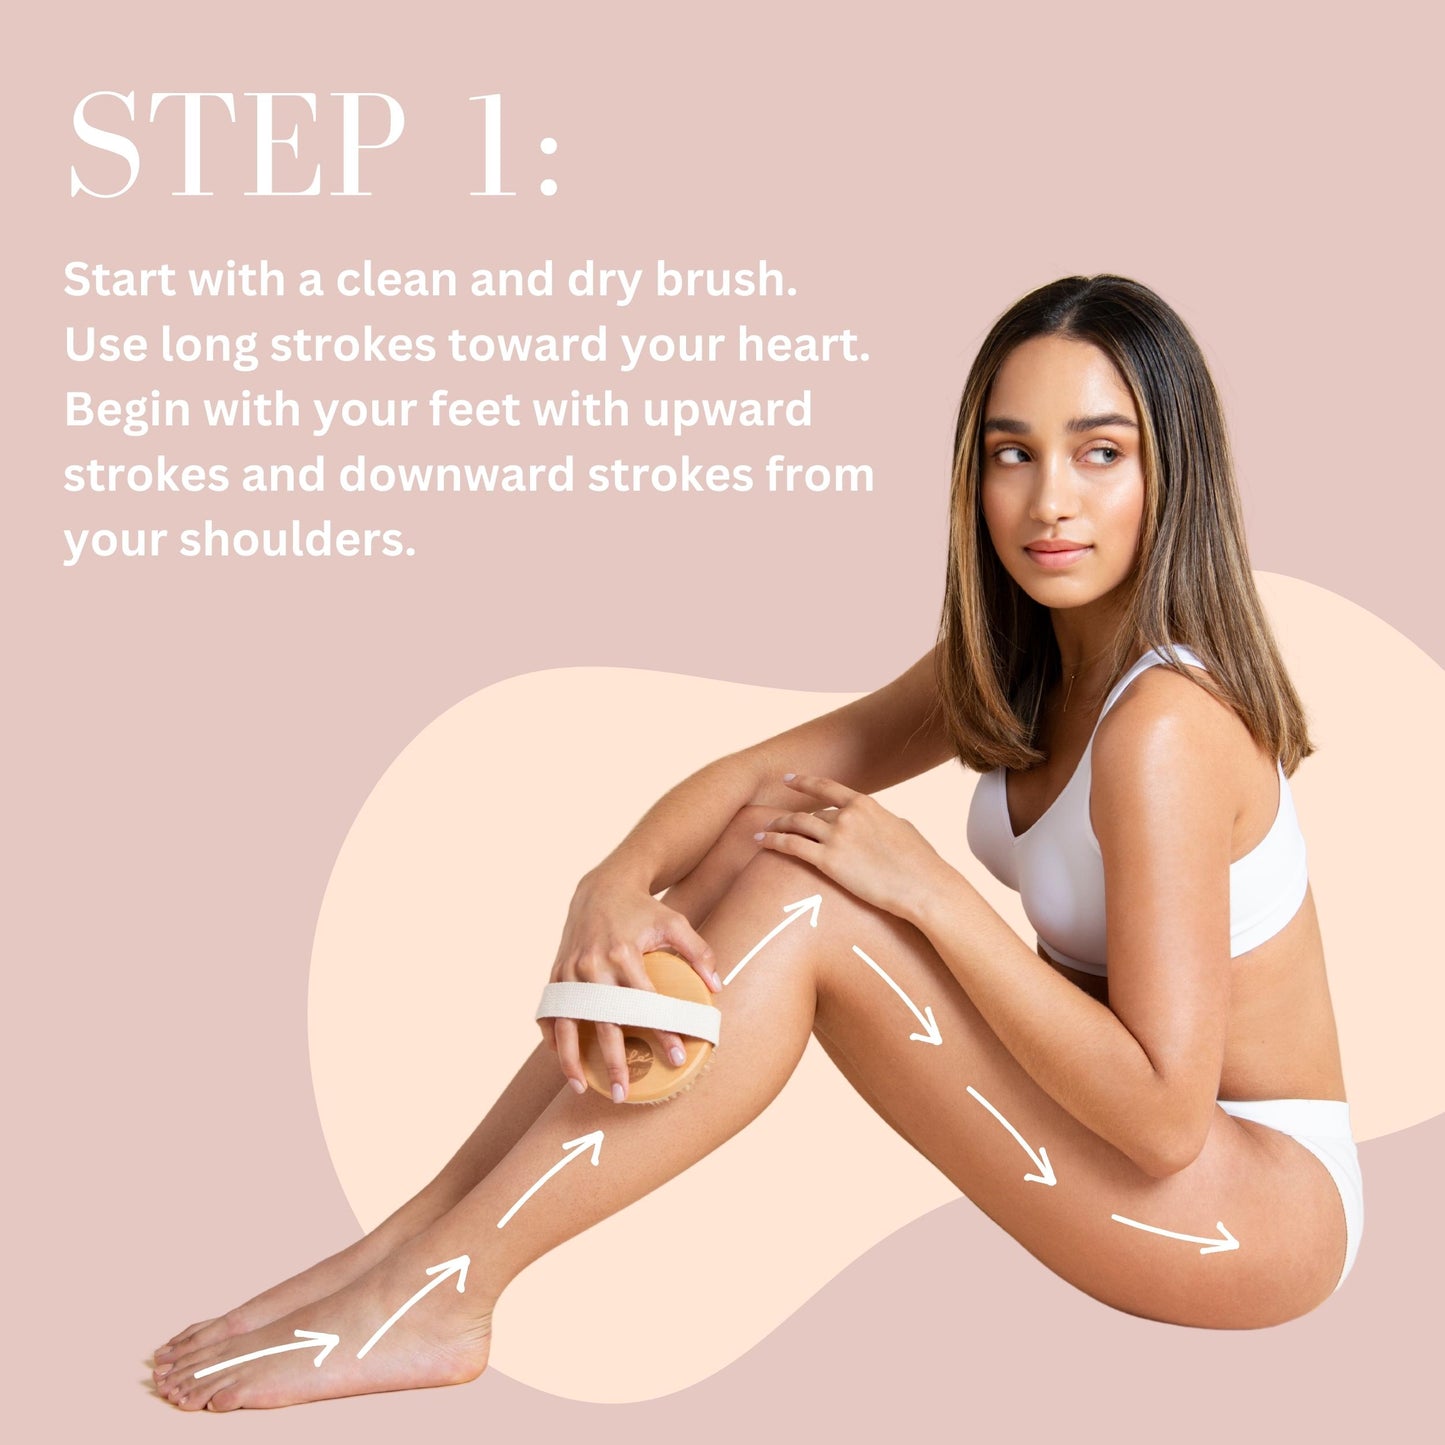 Dry Brushing step by step guide